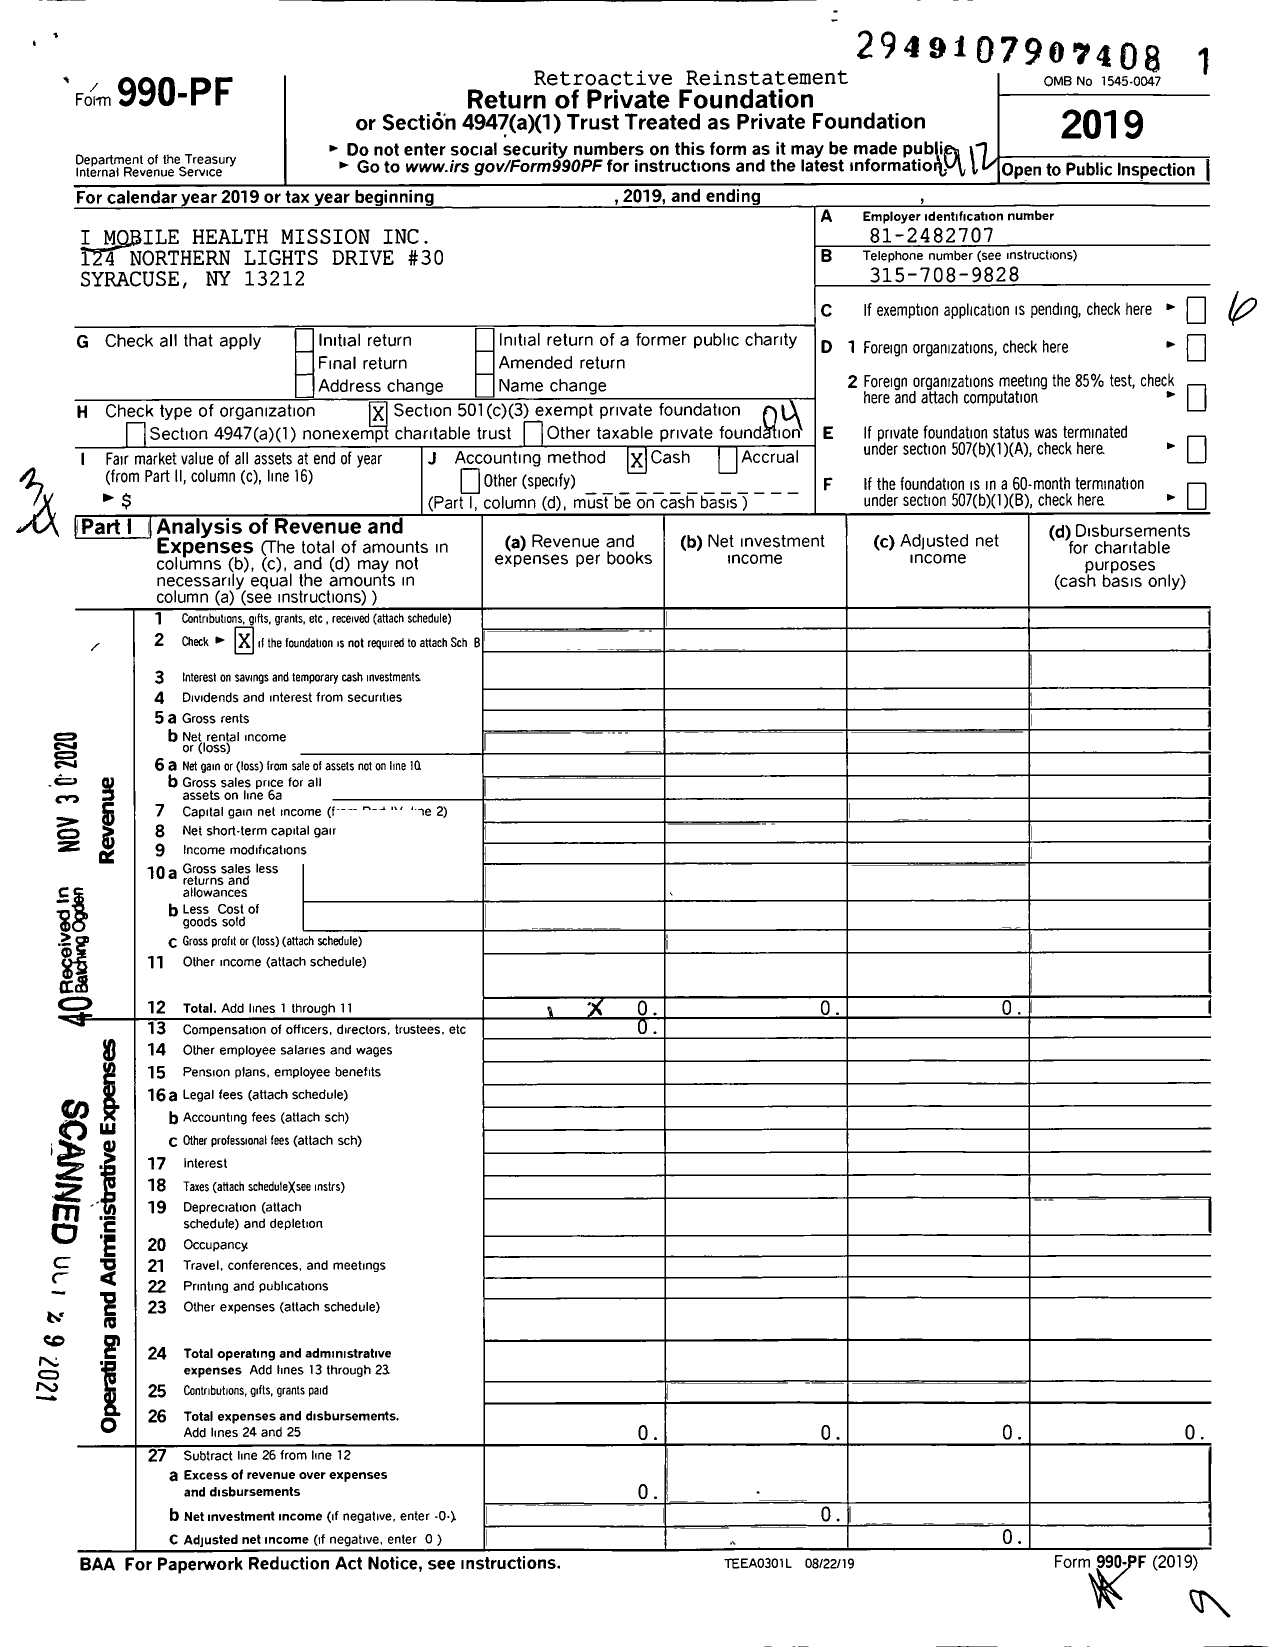 Image of first page of 2019 Form 990PF for I Mobile Health Mission